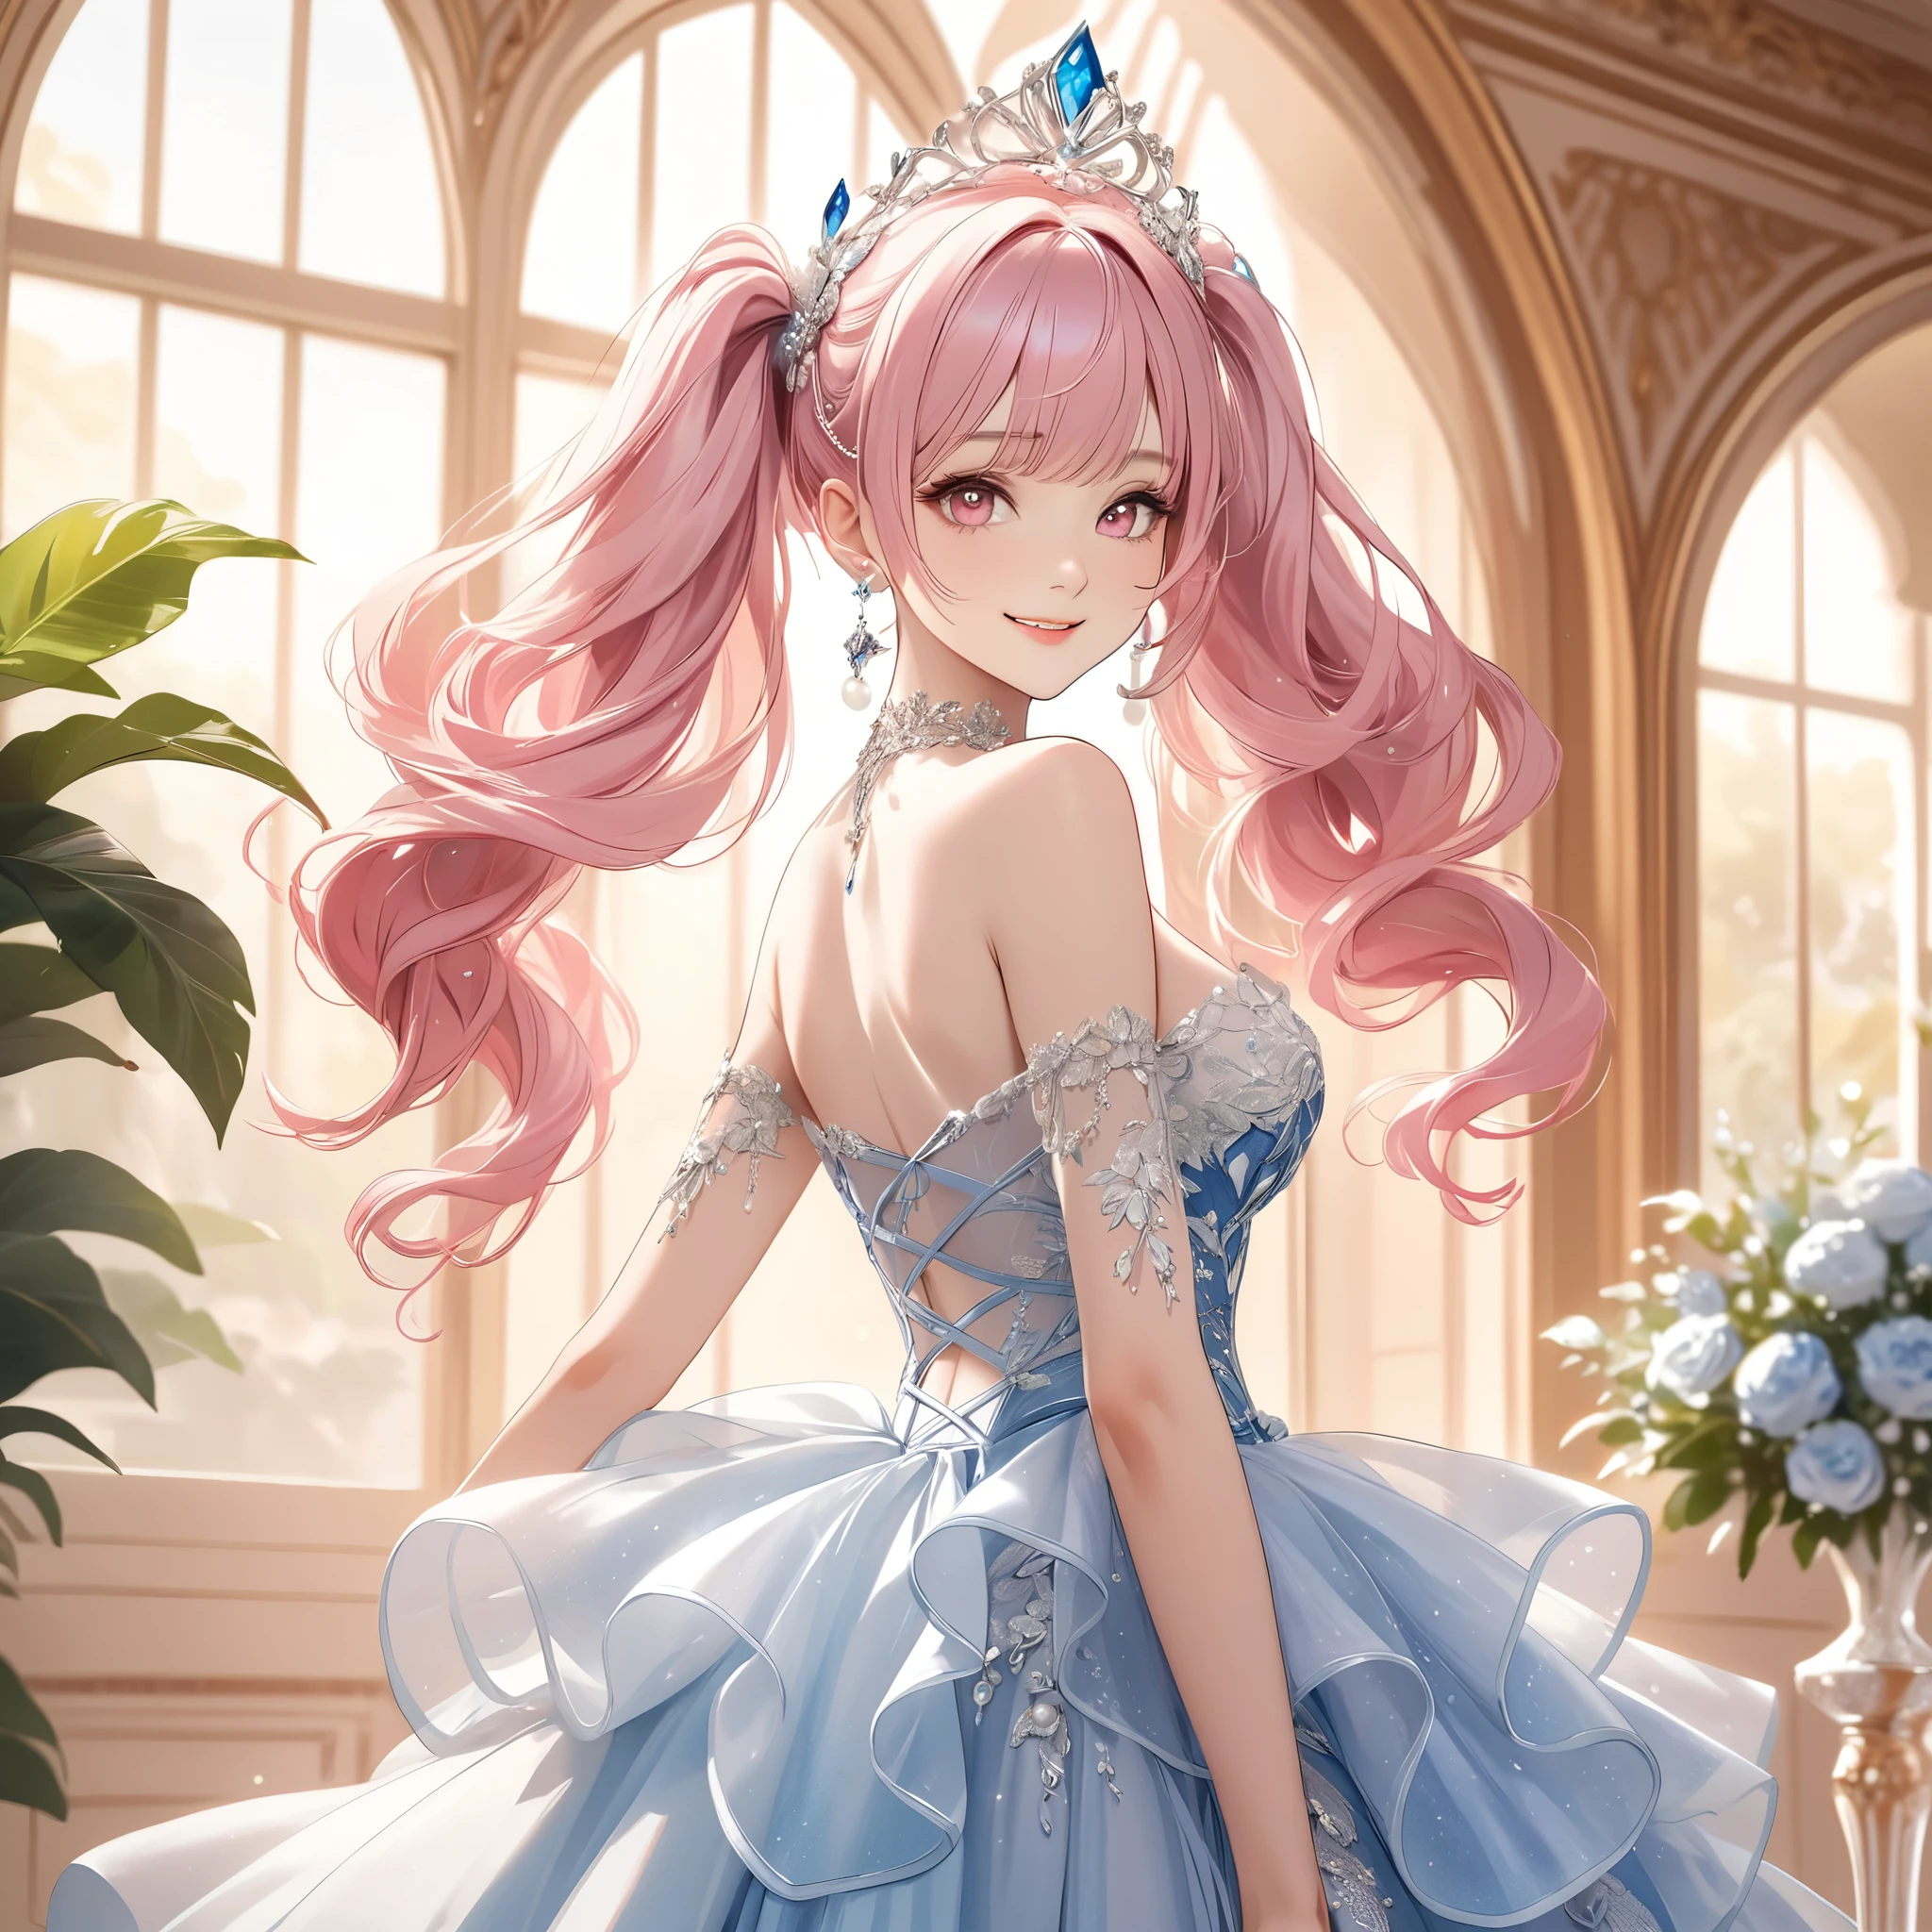 (8K, masutepiece, Highest Quality, Best Quality, Official art, Breathtaking beauty and aesthetics, A highly detailed, The best masterpiece in history that exceeds limits, Breathtaking and beautiful lighting:1.2), (1 Beautiful Girl, Solo), (16 years old), (Beautiful detailed face), (shiny white skin), (Beautiful big bust, cleavage:1.3), (Beautiful detailed pink twintails hair, Bangs:1.3), (beautiful detailed adolable drooing pink eyes:1.3), (Beautiful Luxurious blue Princess Dresses, See-through intricate lace, black cute bow ribbon, a lot of see-through frill, sheer chiffon material, silver thread, Diamond, pearl, corset), (Beautiful Luxurious Diamonds Tiara), (happy smile, Beautiful smile, Gentle smile, cute smile, innocent smile like an angel:1.2), breathtaking scenery, Attractive, amazing, Beautiful, Elegant, Luxurious, magnifica, Eye-catching, the ultimate beauty, Supreme Beauty, Superlative beauty, Elegant, Beauty, Graceful, Everyone loves it, Beauty that fascinates everyone, Healed, The highest level of complete beauty, cute like an idol, Stylish like a fashion model, Goddess-like grace, Be loved, adolable, Look at the camera, cute pose, Happy, looking back, (ultra detailed realistic Breathtakingly beautiful Luxurious room:1.2), (Sparkling pearl effect:1.5),